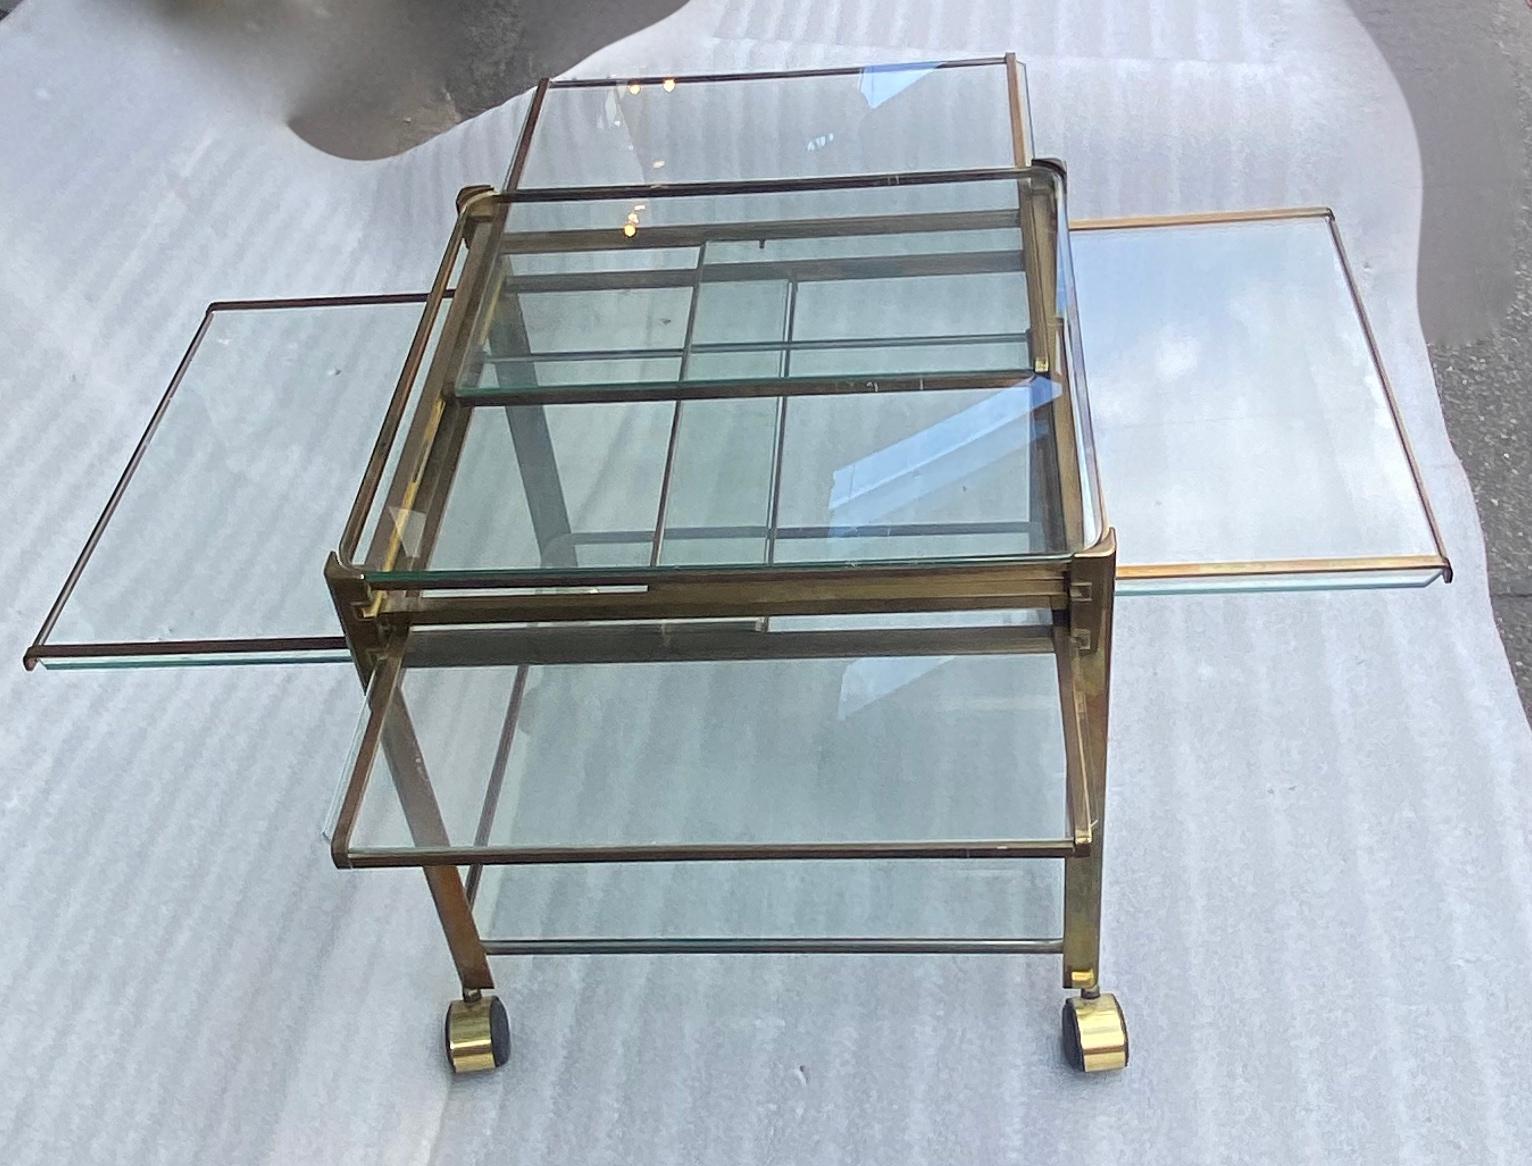  Maison Malabert. From Palace Parisien
Trolley with 2 glass shelves resting on an angled base in patinated brass.
The 4 extensions = 105 X 105 cm.
Measures: H: 50 cm W: 51 cm D: 51 cm.